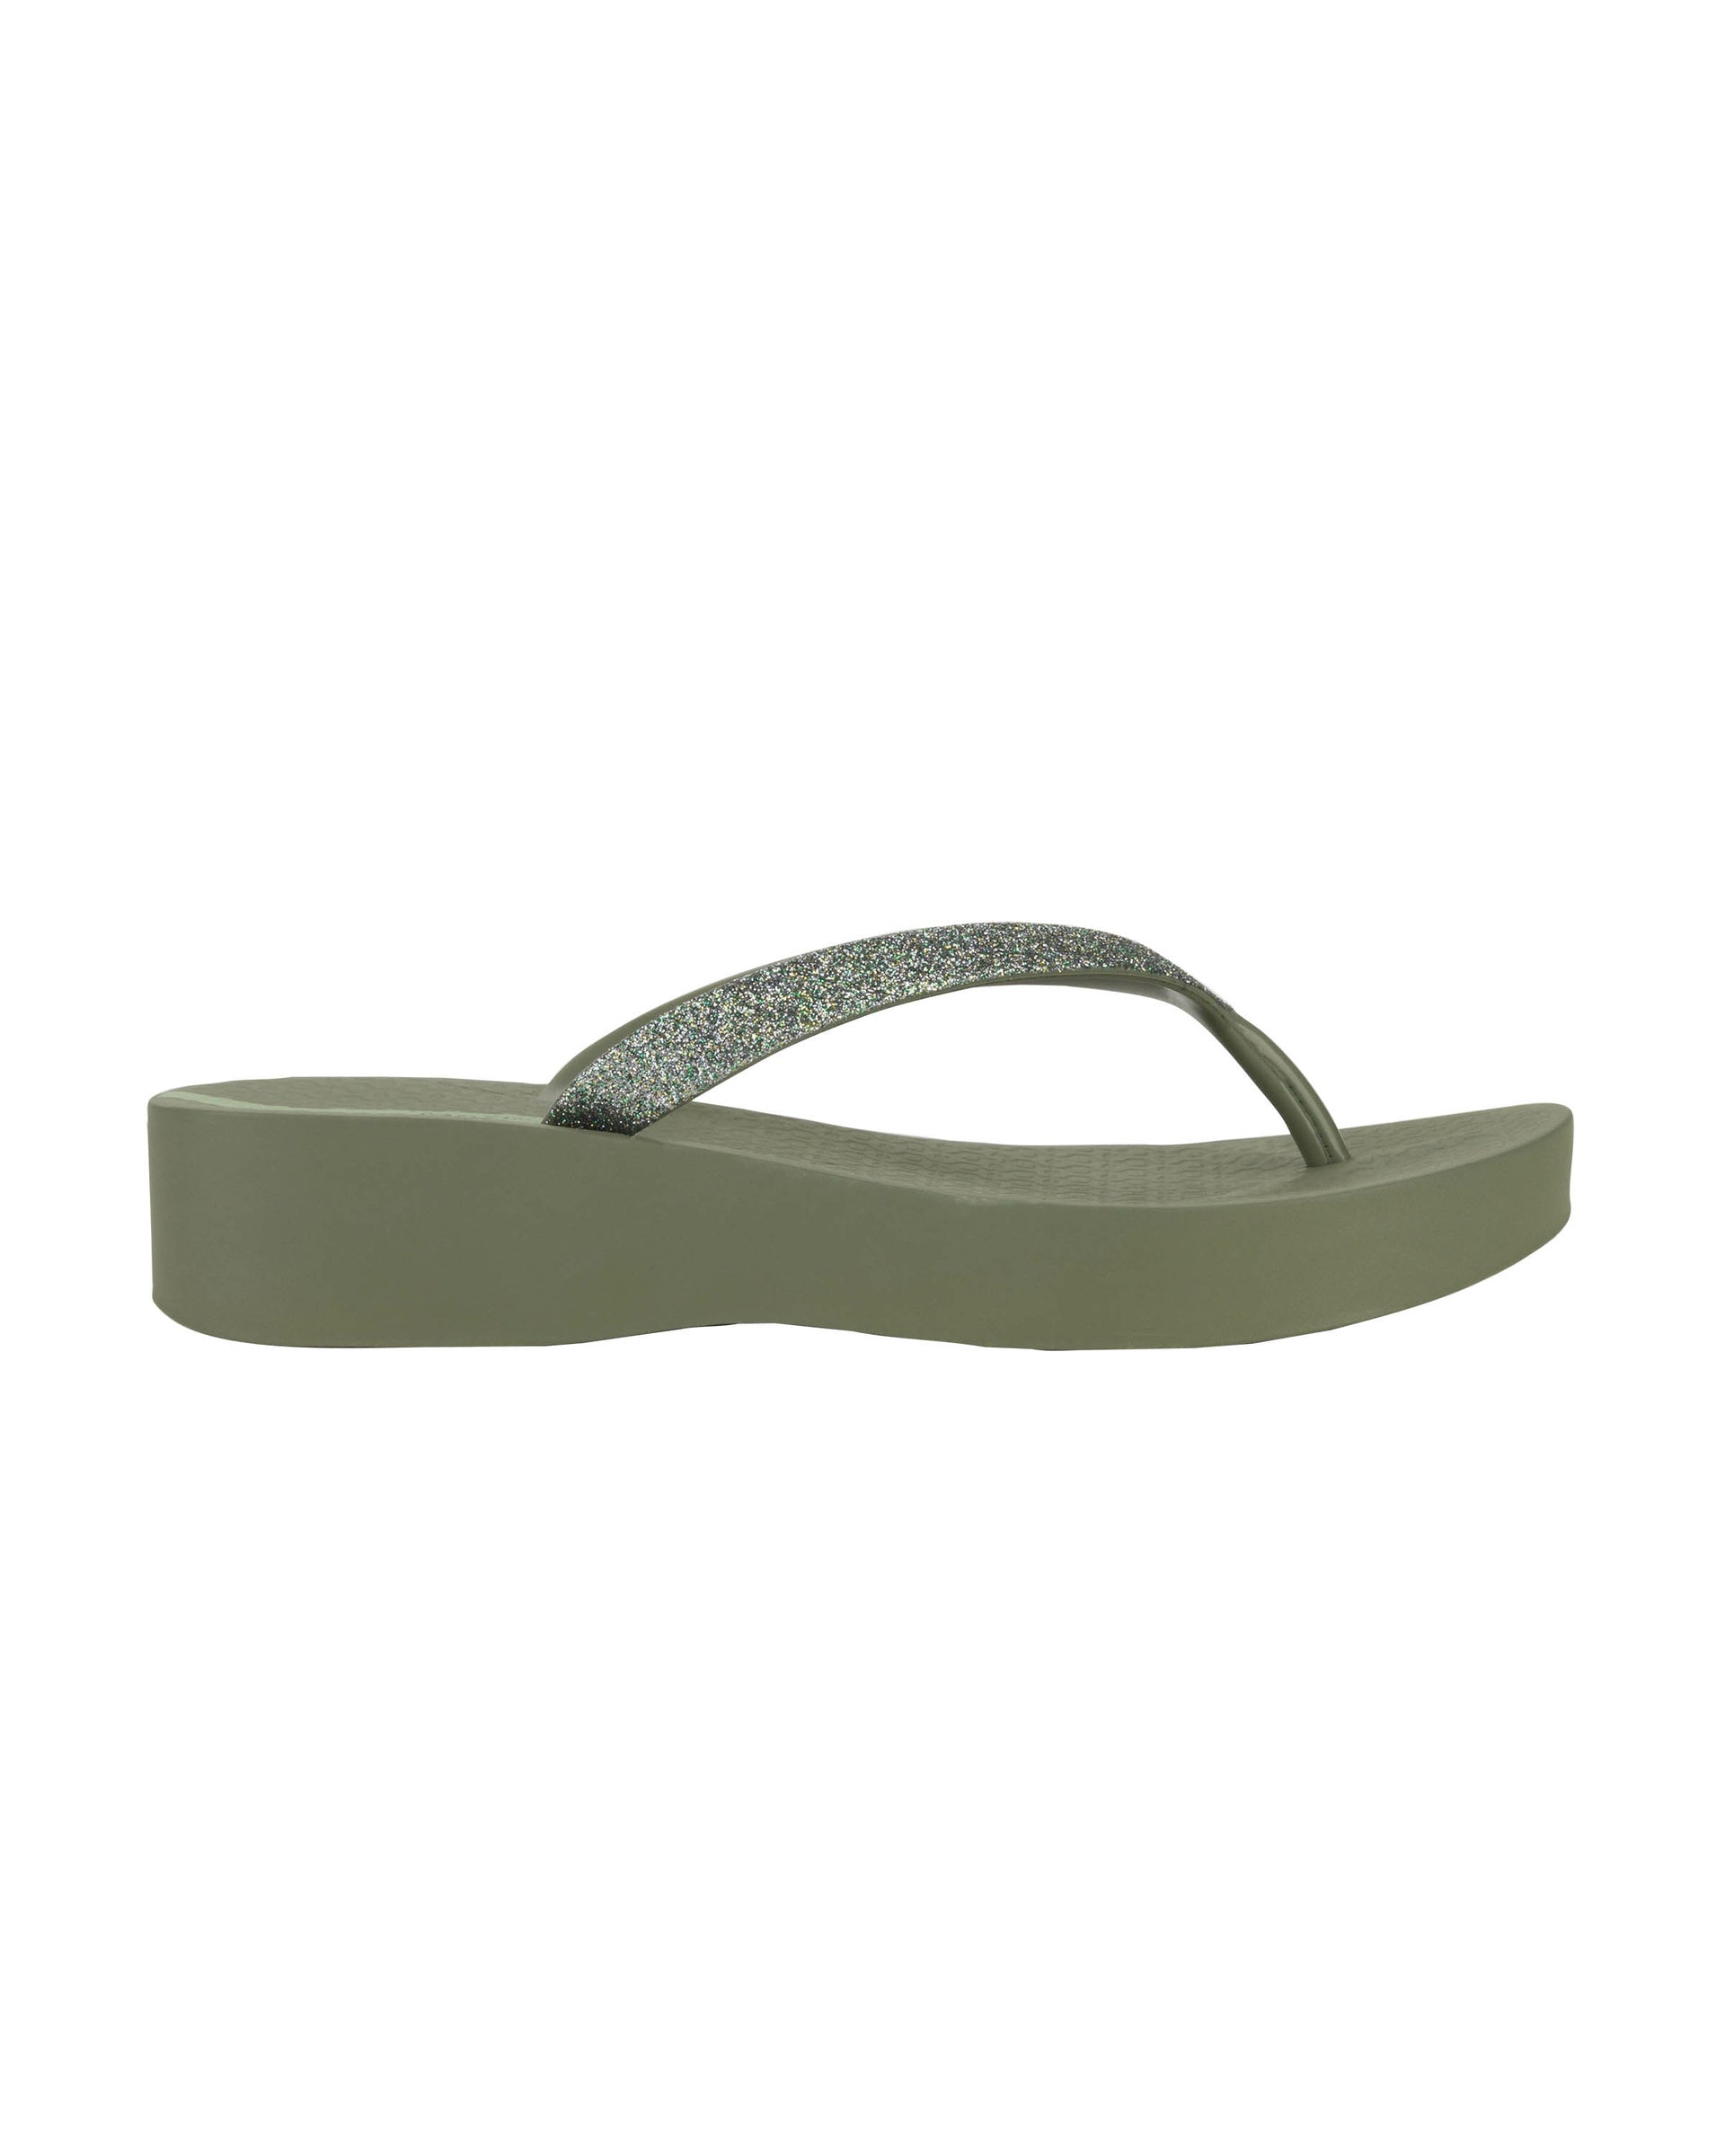 Outer side view of a green Ipanema Mesh Chic women's wedge flip flop with glitter green straps.